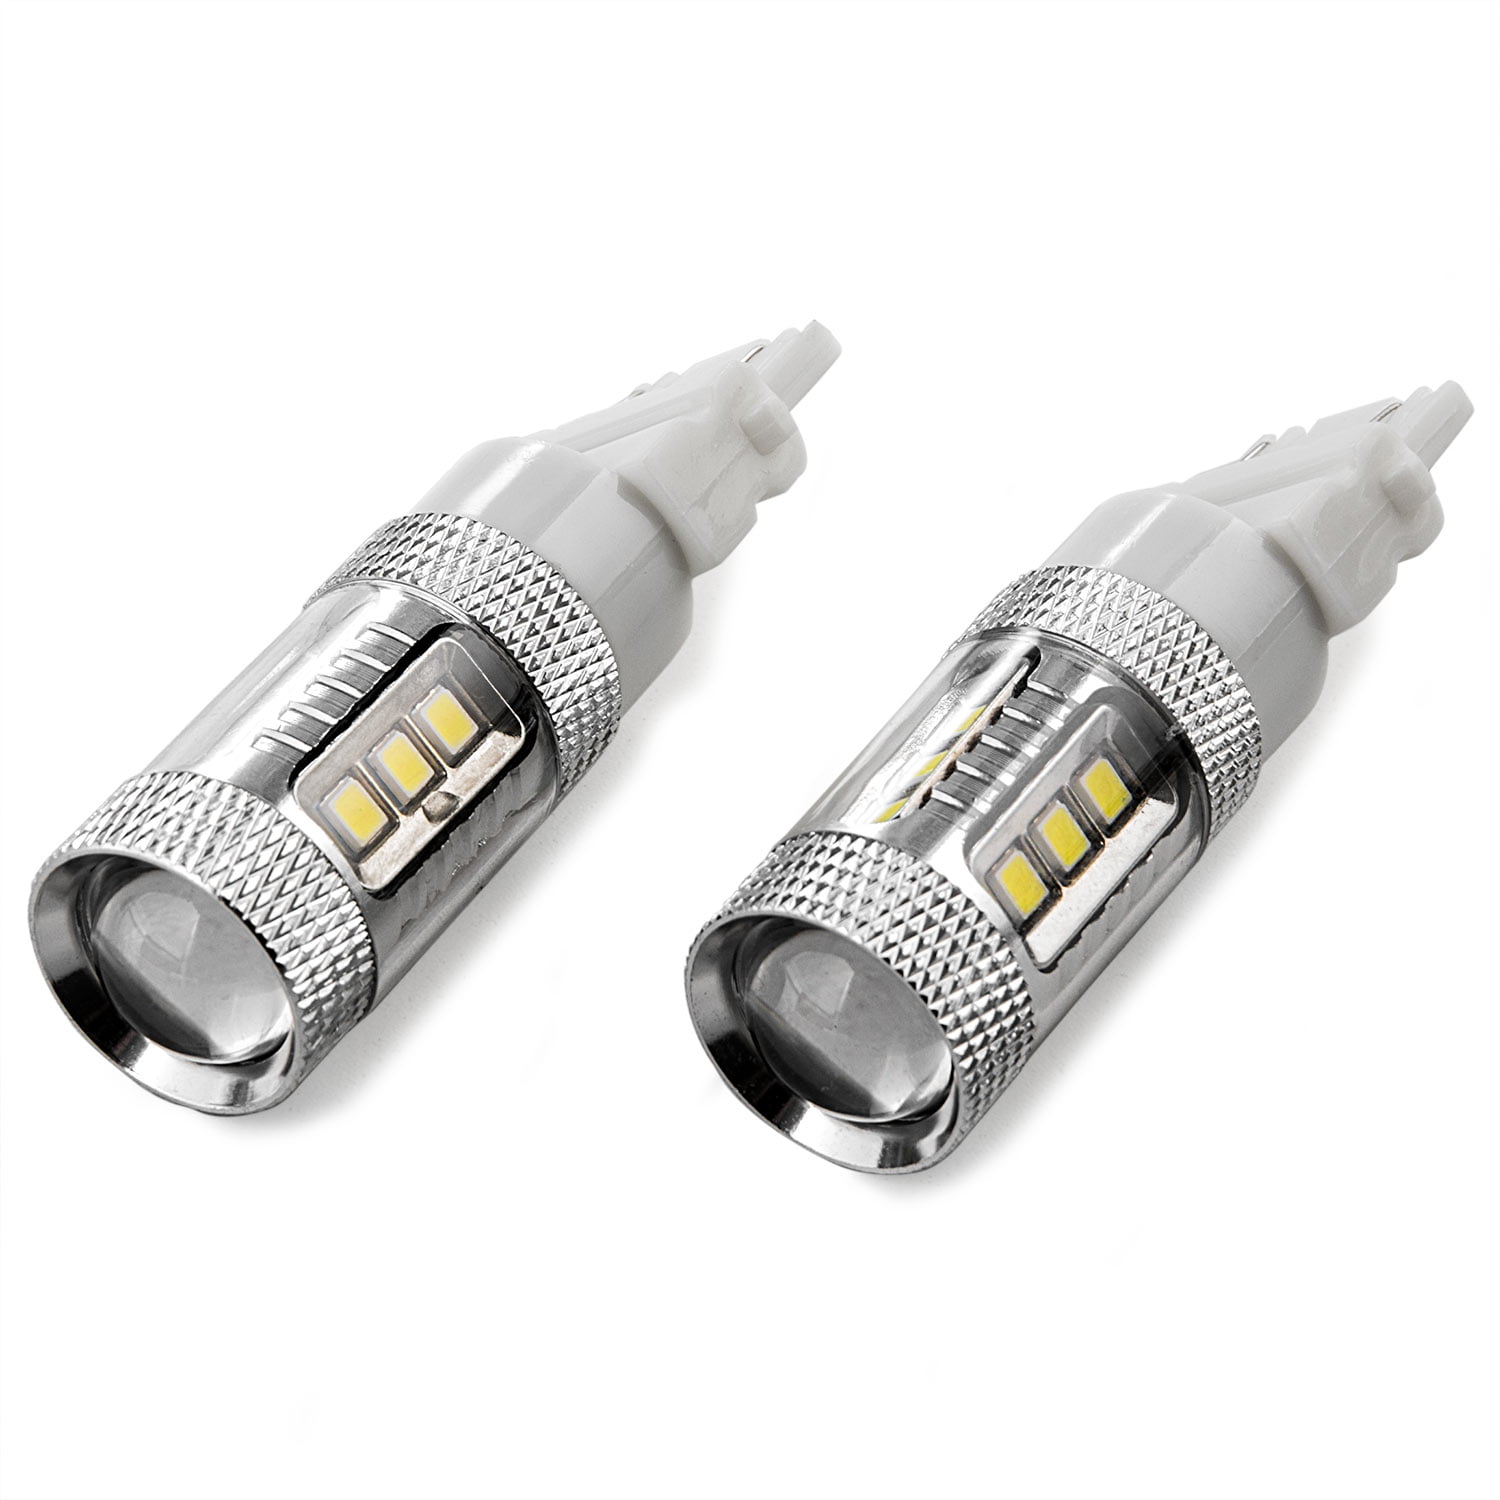 Xenon White TORIBIO 12-24V 3030 Chipest 3056 3156 3057 3157 LED Bulbs With Projector for Backup Reverse Lights Turn Signal Lights Tail Brake Lights 4 Pcs 